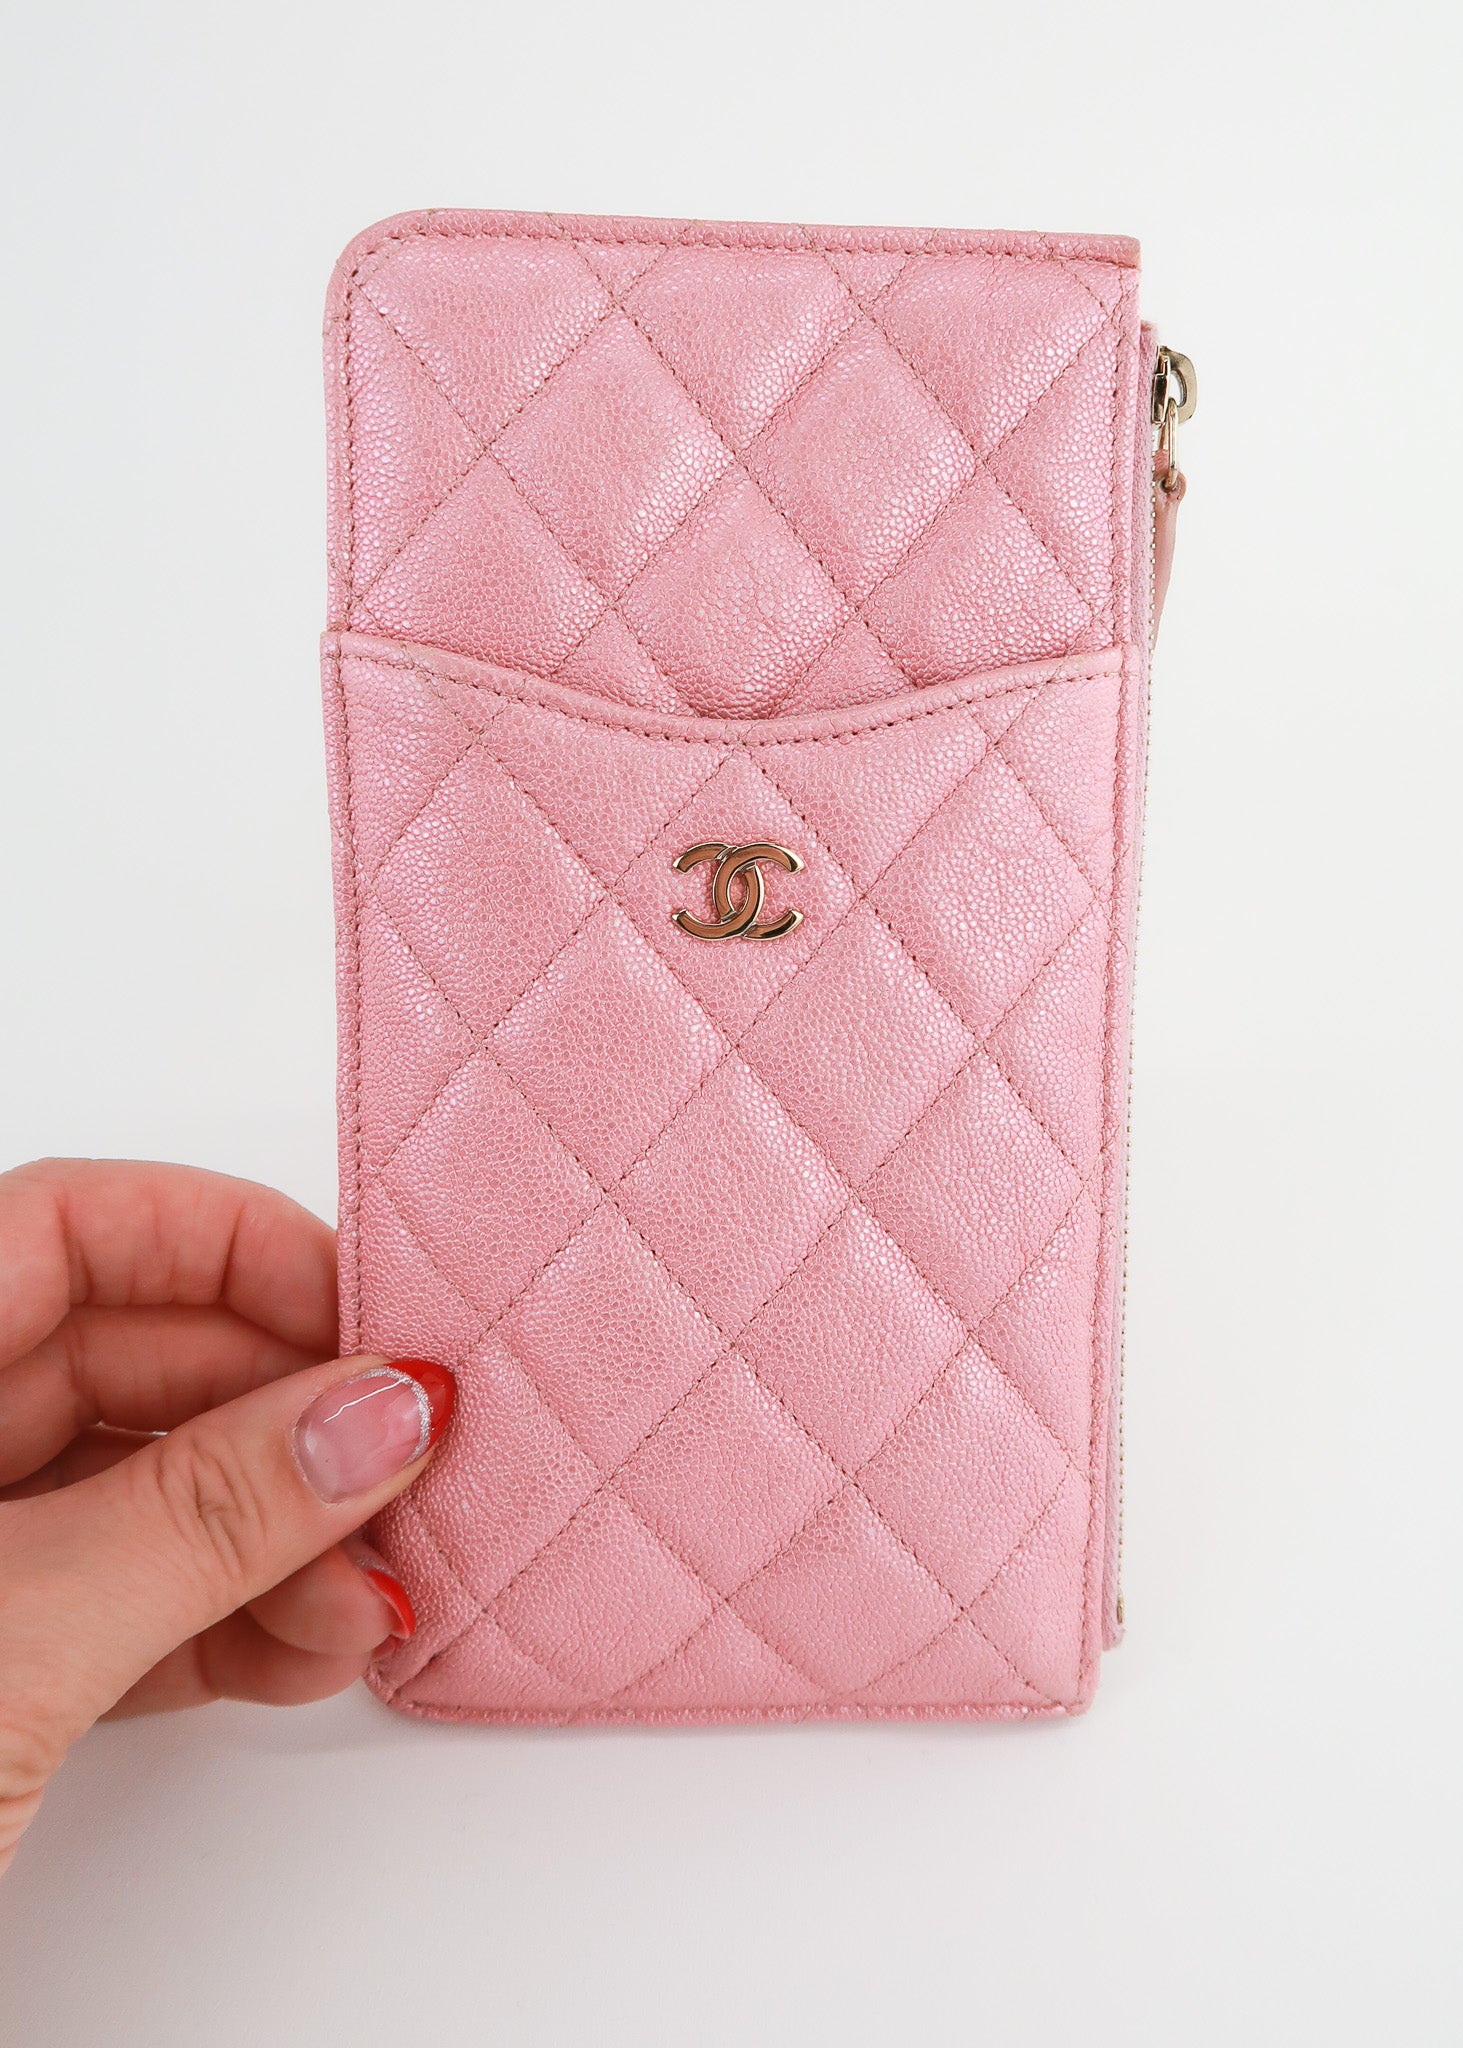 CHANEL 18S Pearly Pink Caviar Flat Card Holder Mini Wallet Iridescent Card  Case